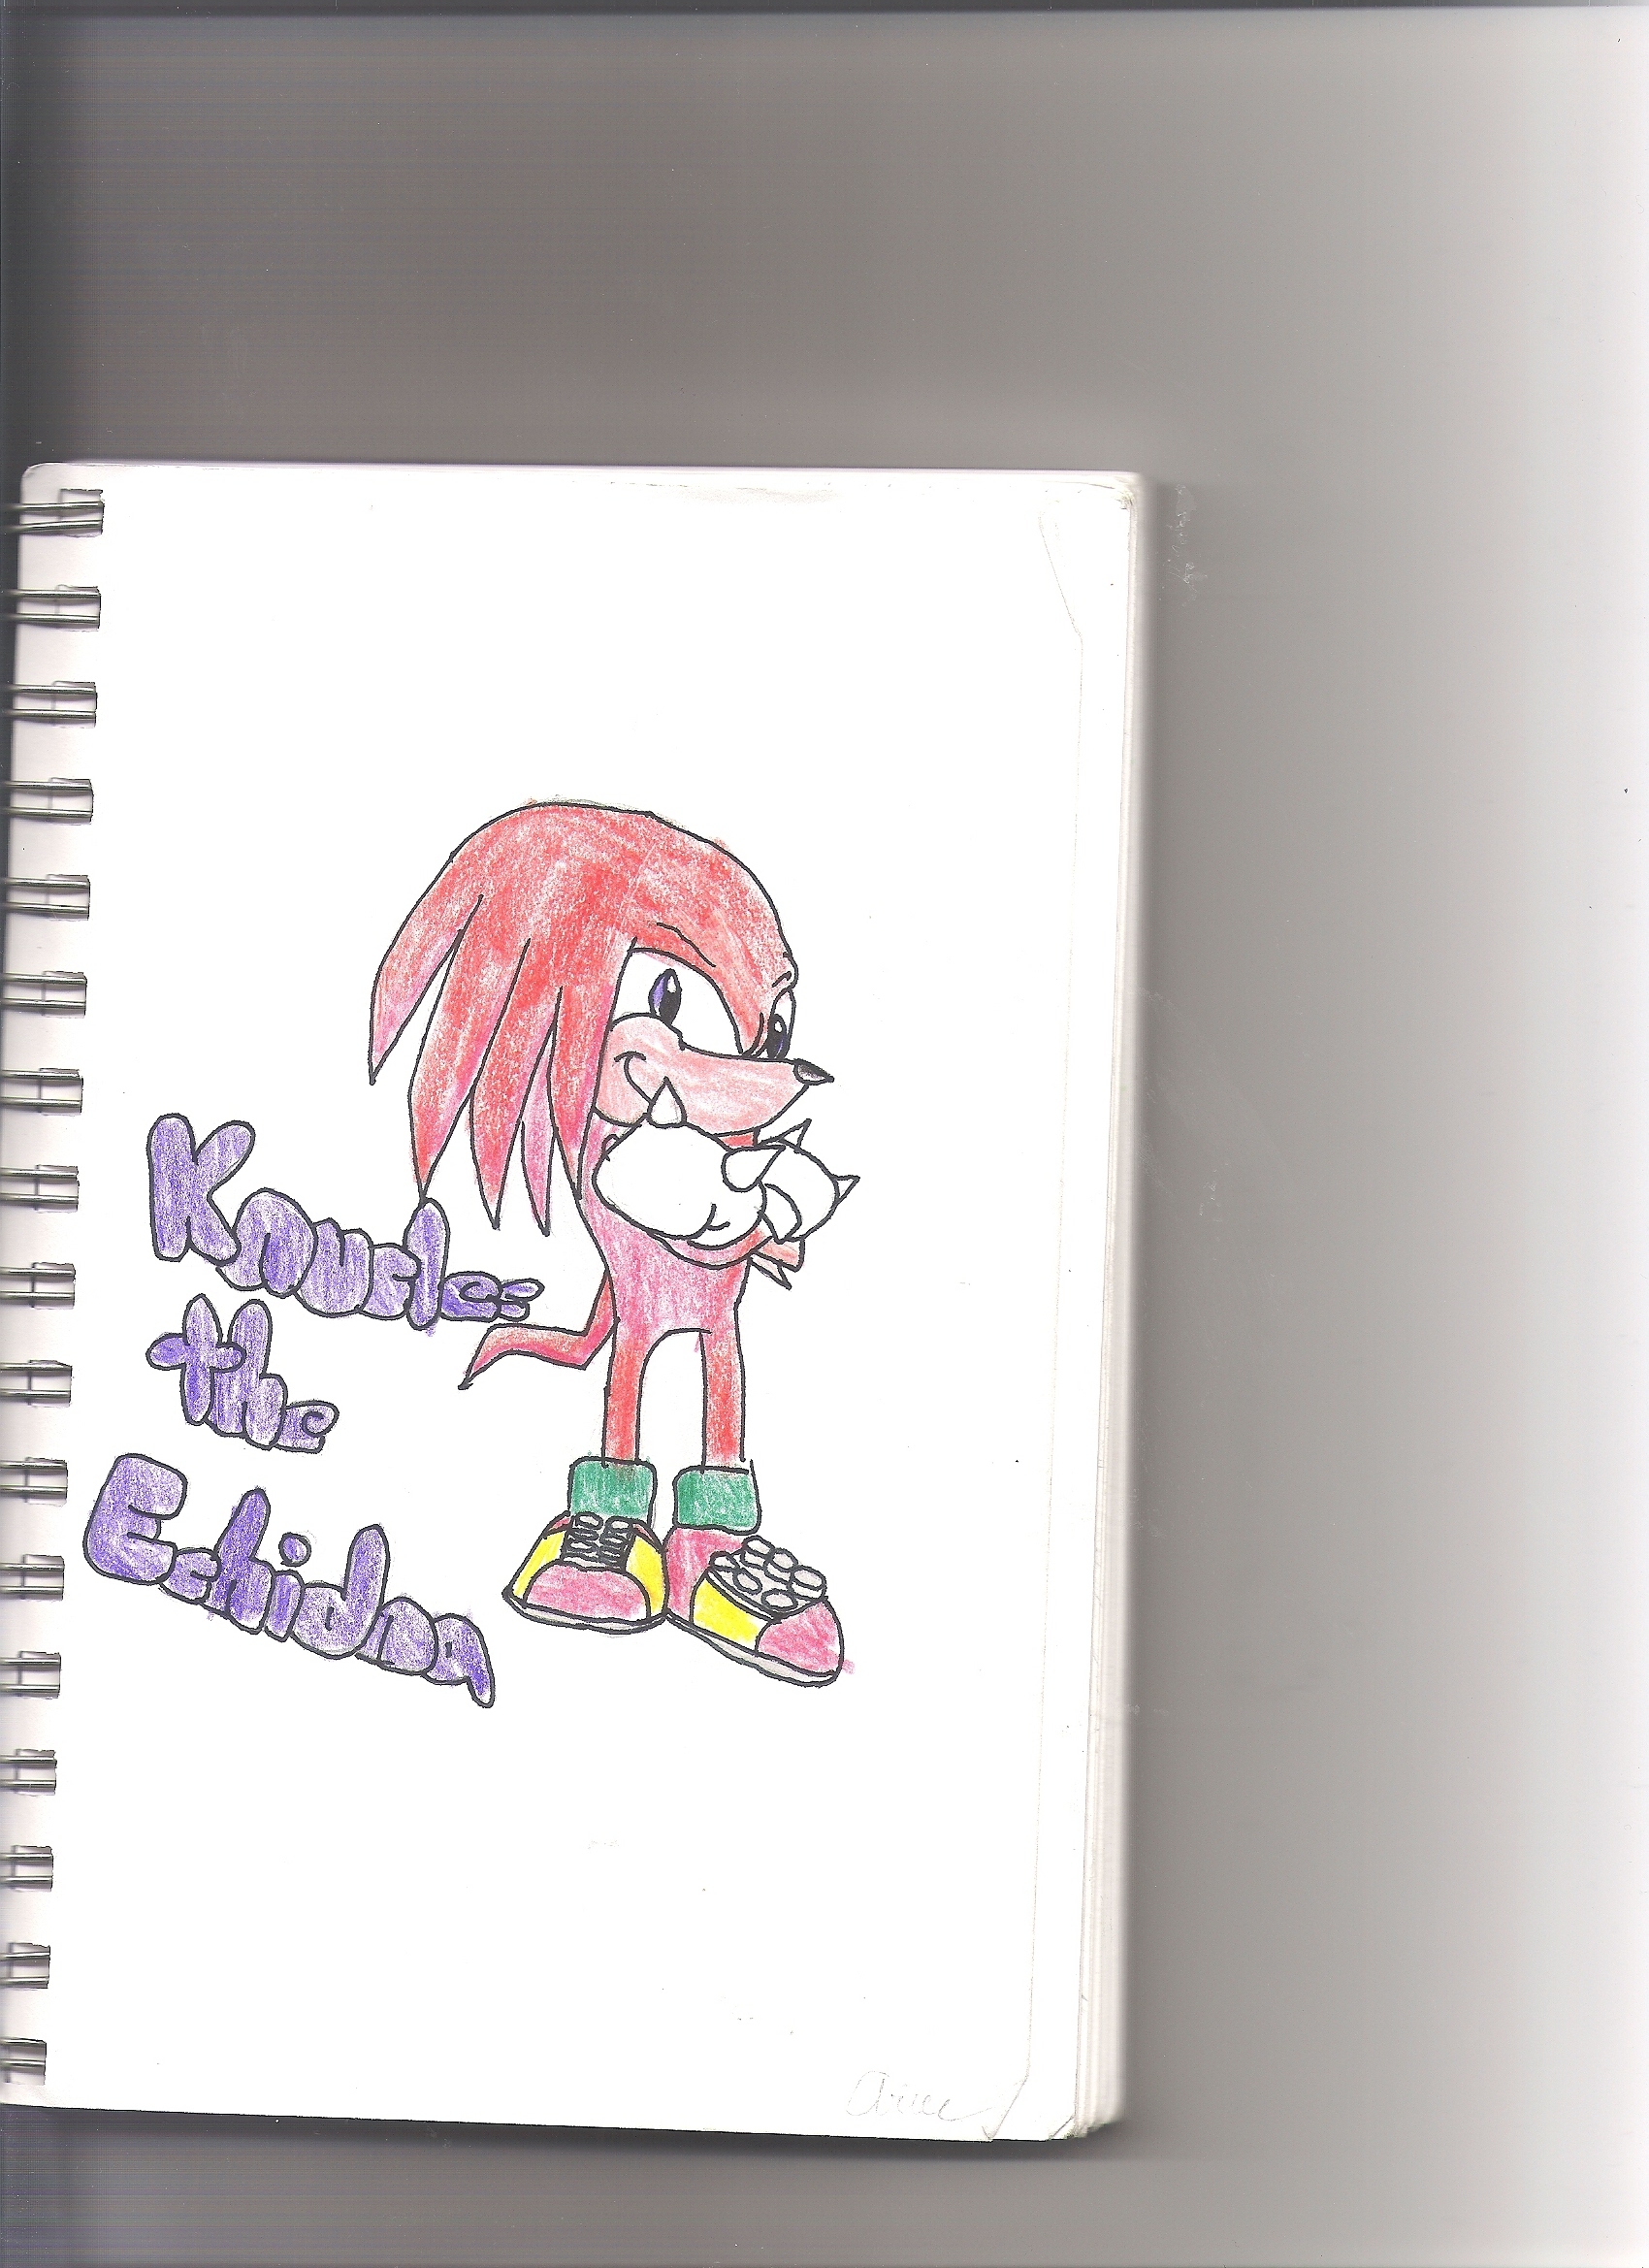 Knuckles by Arue